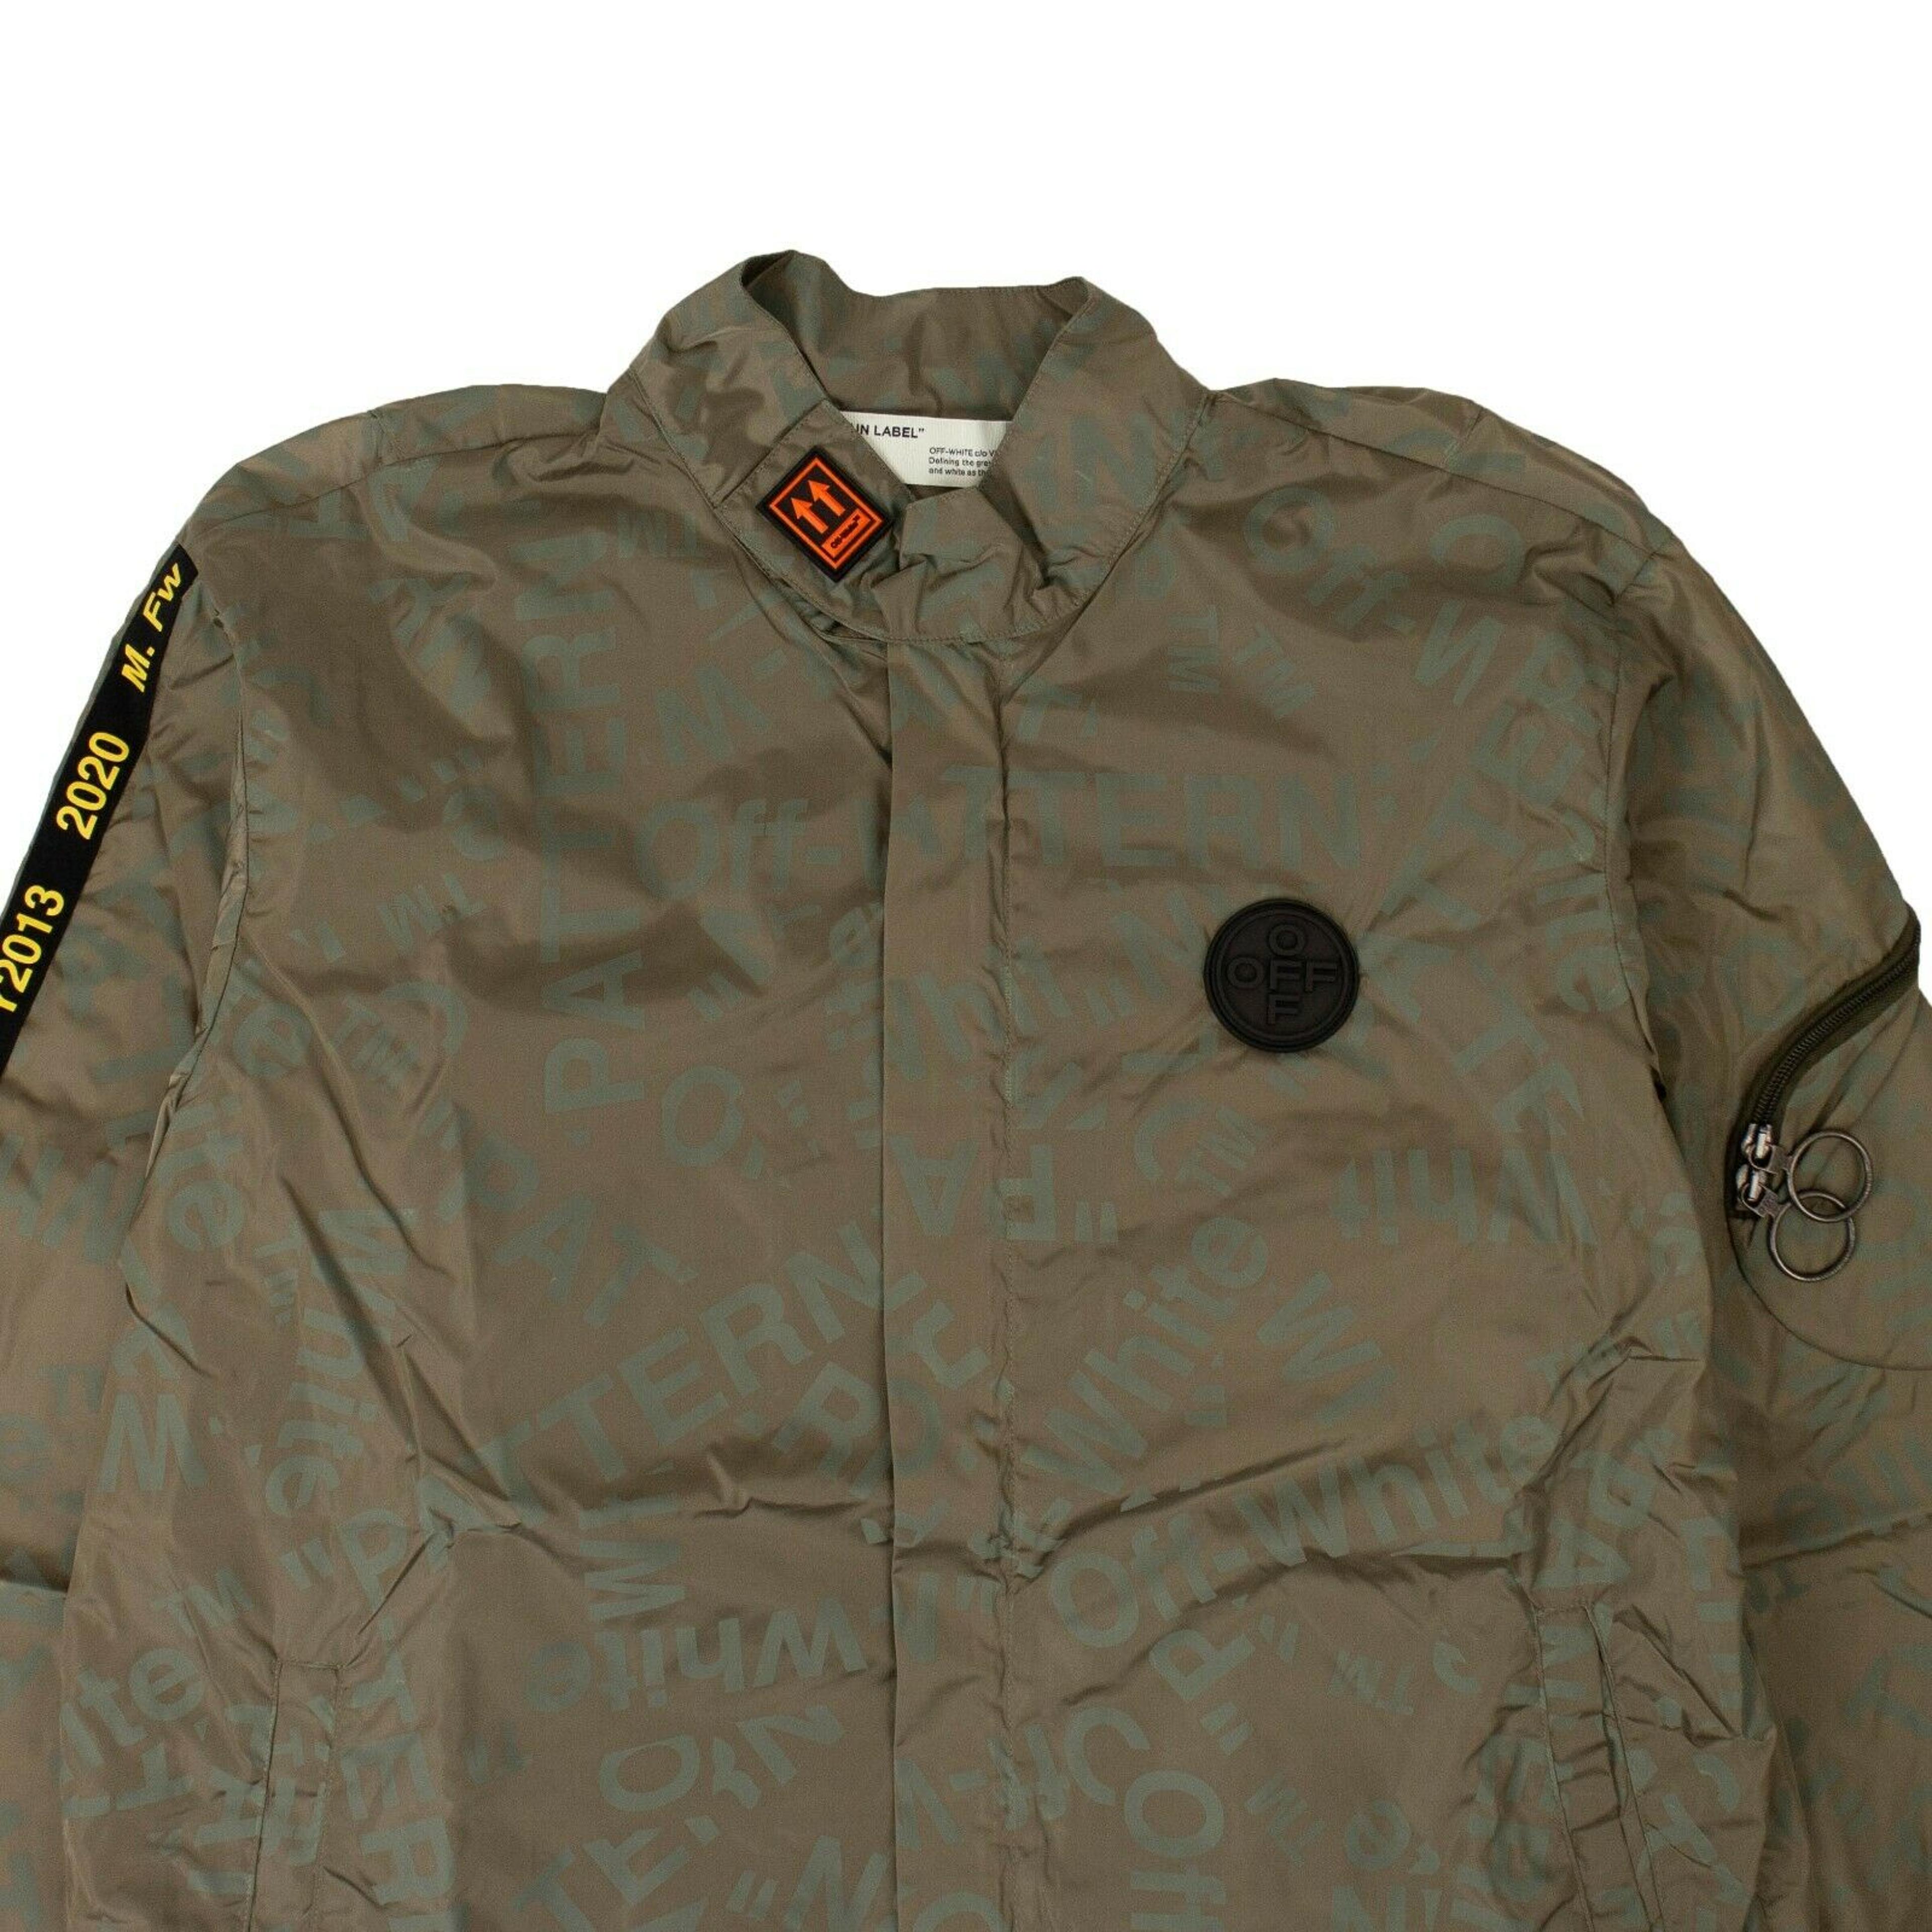 Alternate View 2 of Green All Over Logo Print Jacket